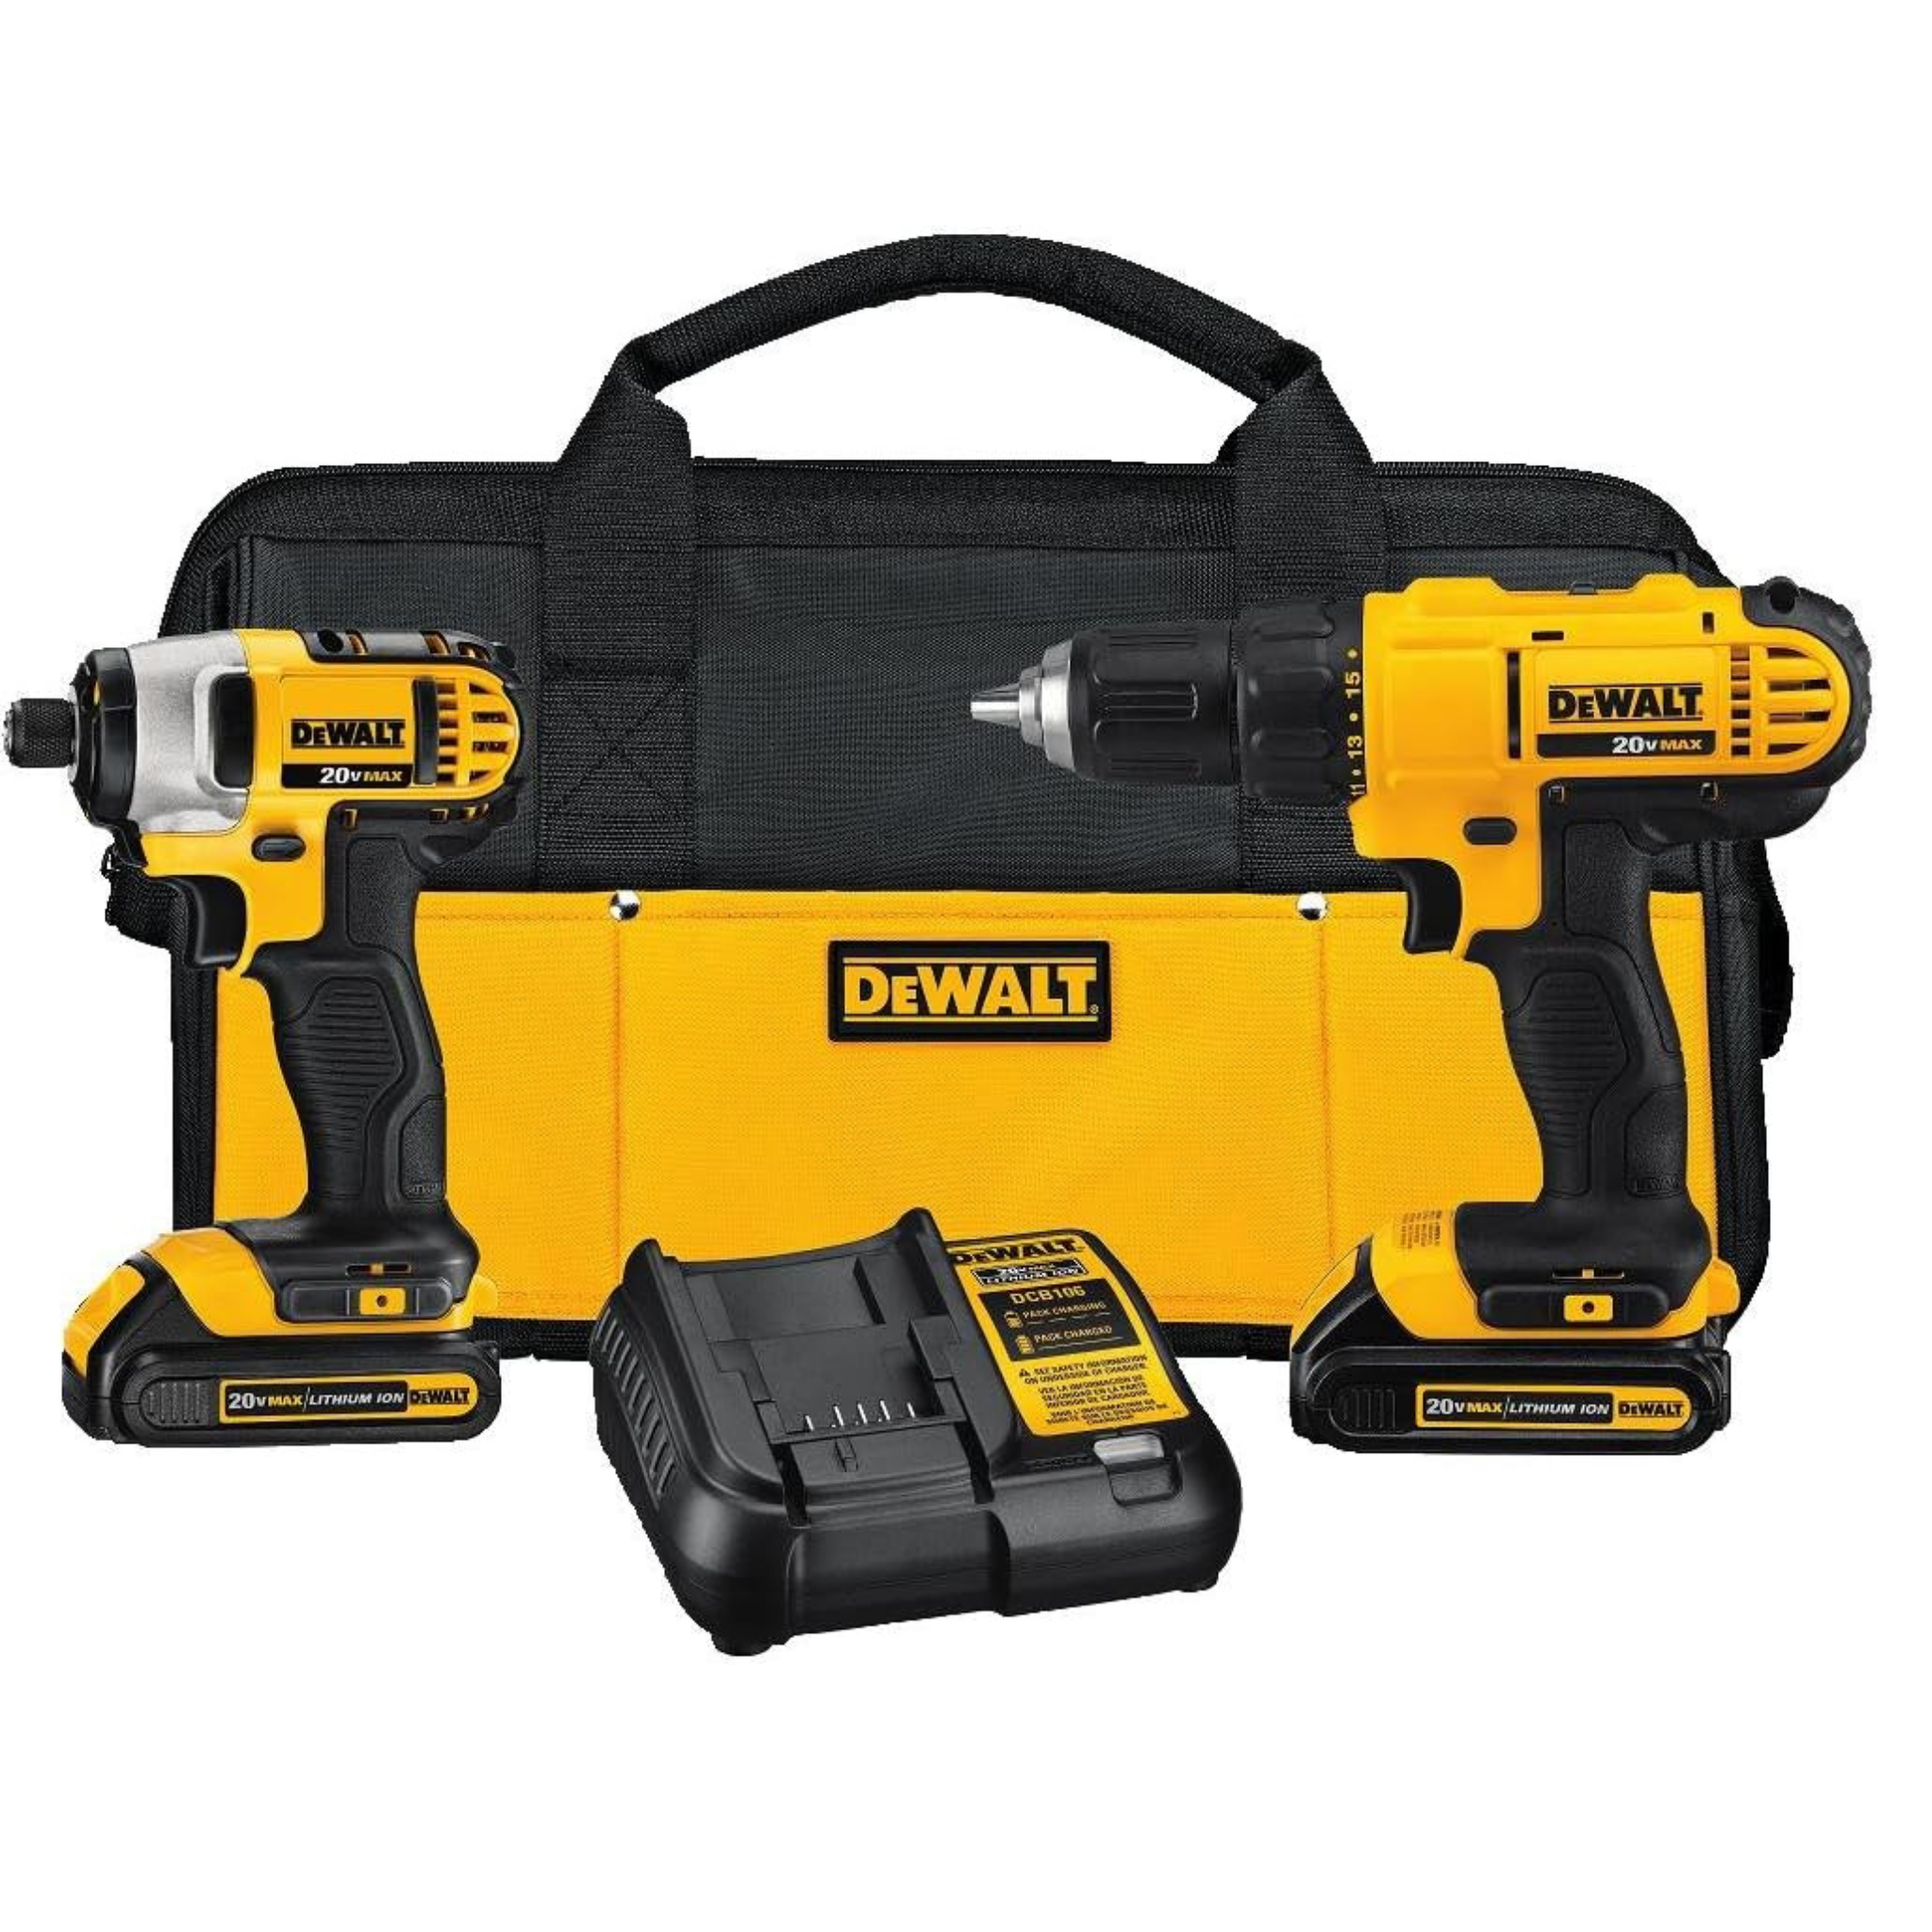 Dewalt 20V MAX Cordless Drill and Impact Driver with 2 Batteries and Charger